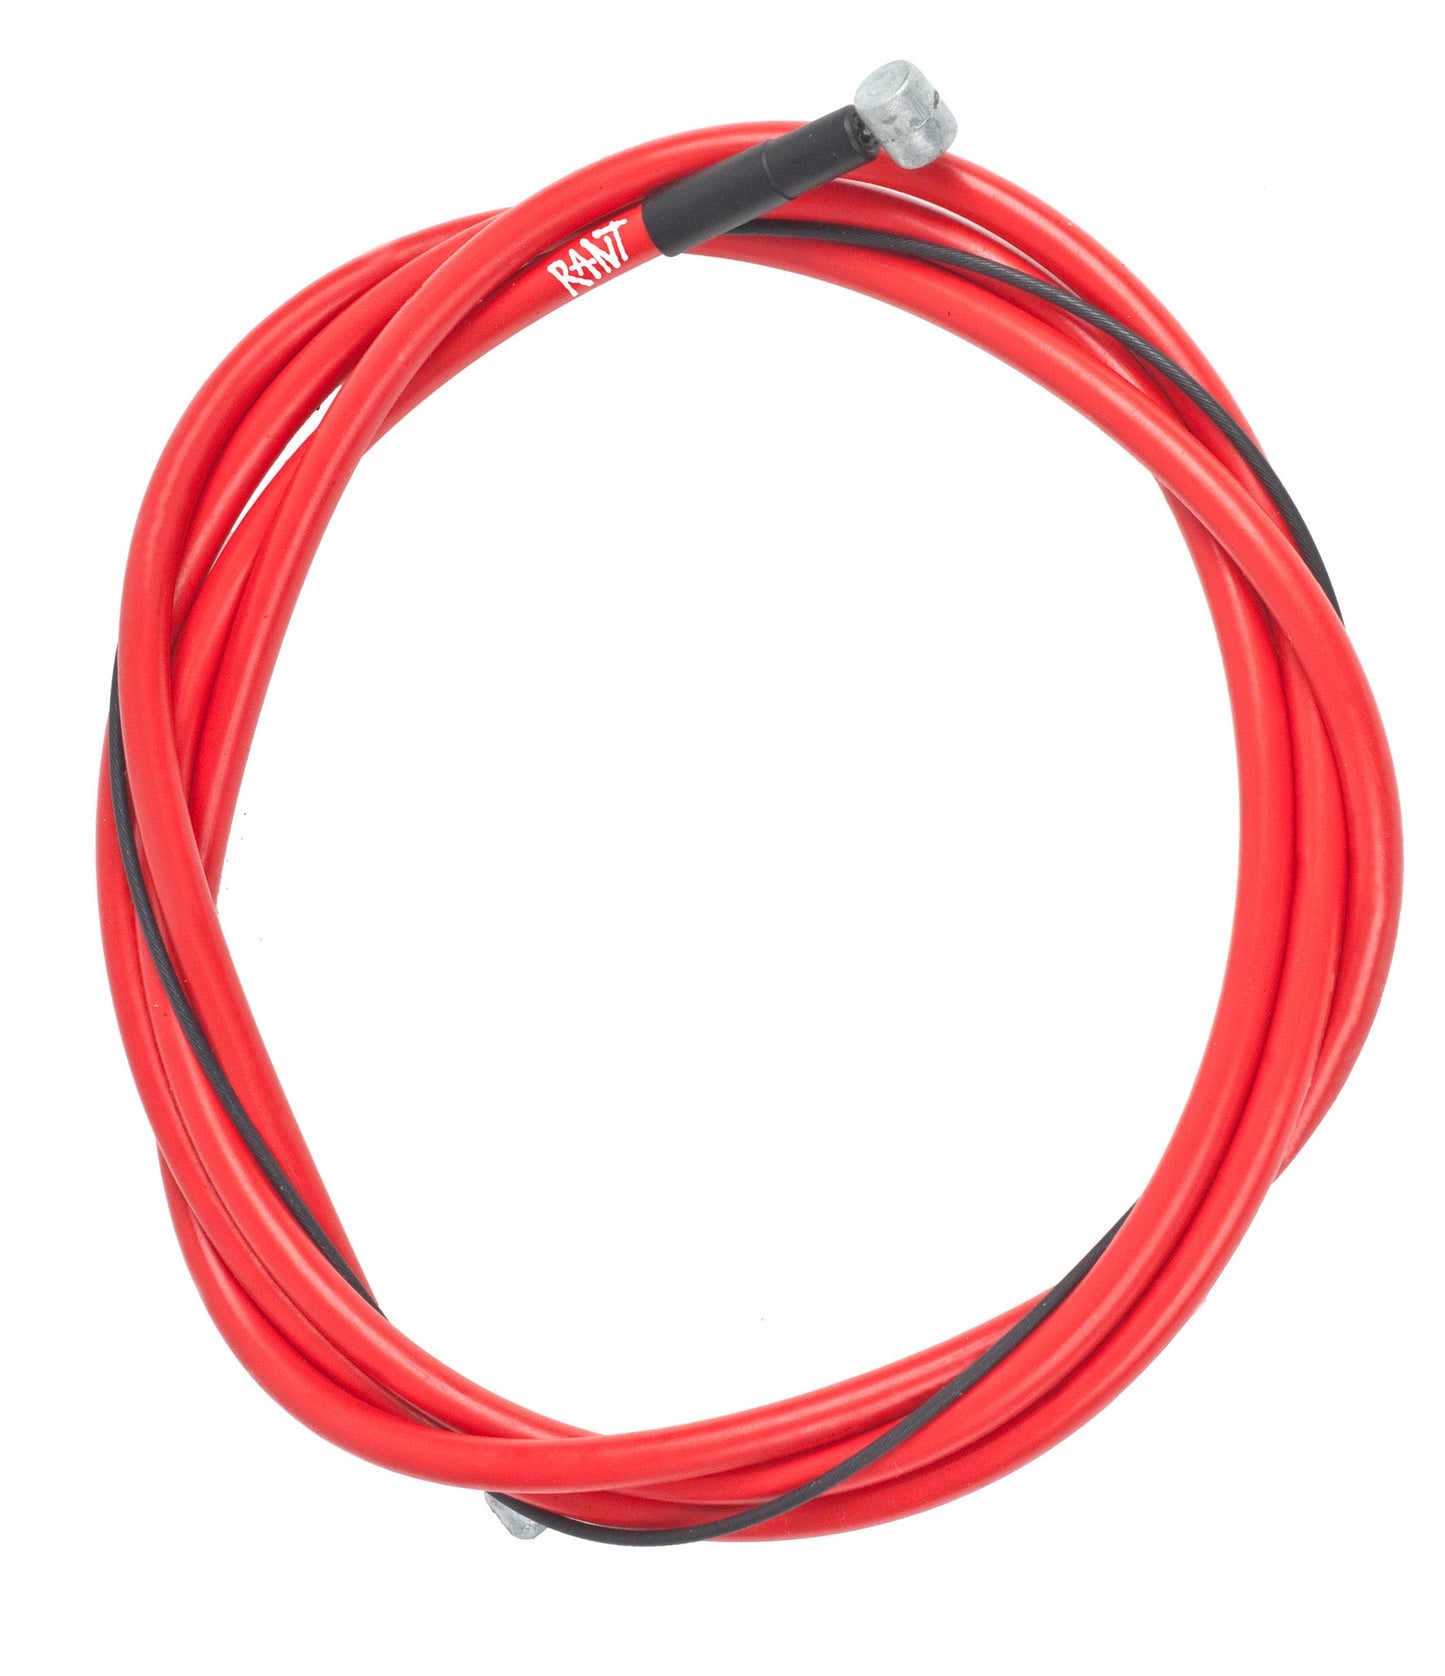 RANT Spring Brake Linear Cable (Red) - Sparkys Brands Sparkys Brands  Brake Cables, Brakes and Cables, Components, Rant Bmx bmx pro quality freestyle bicycle